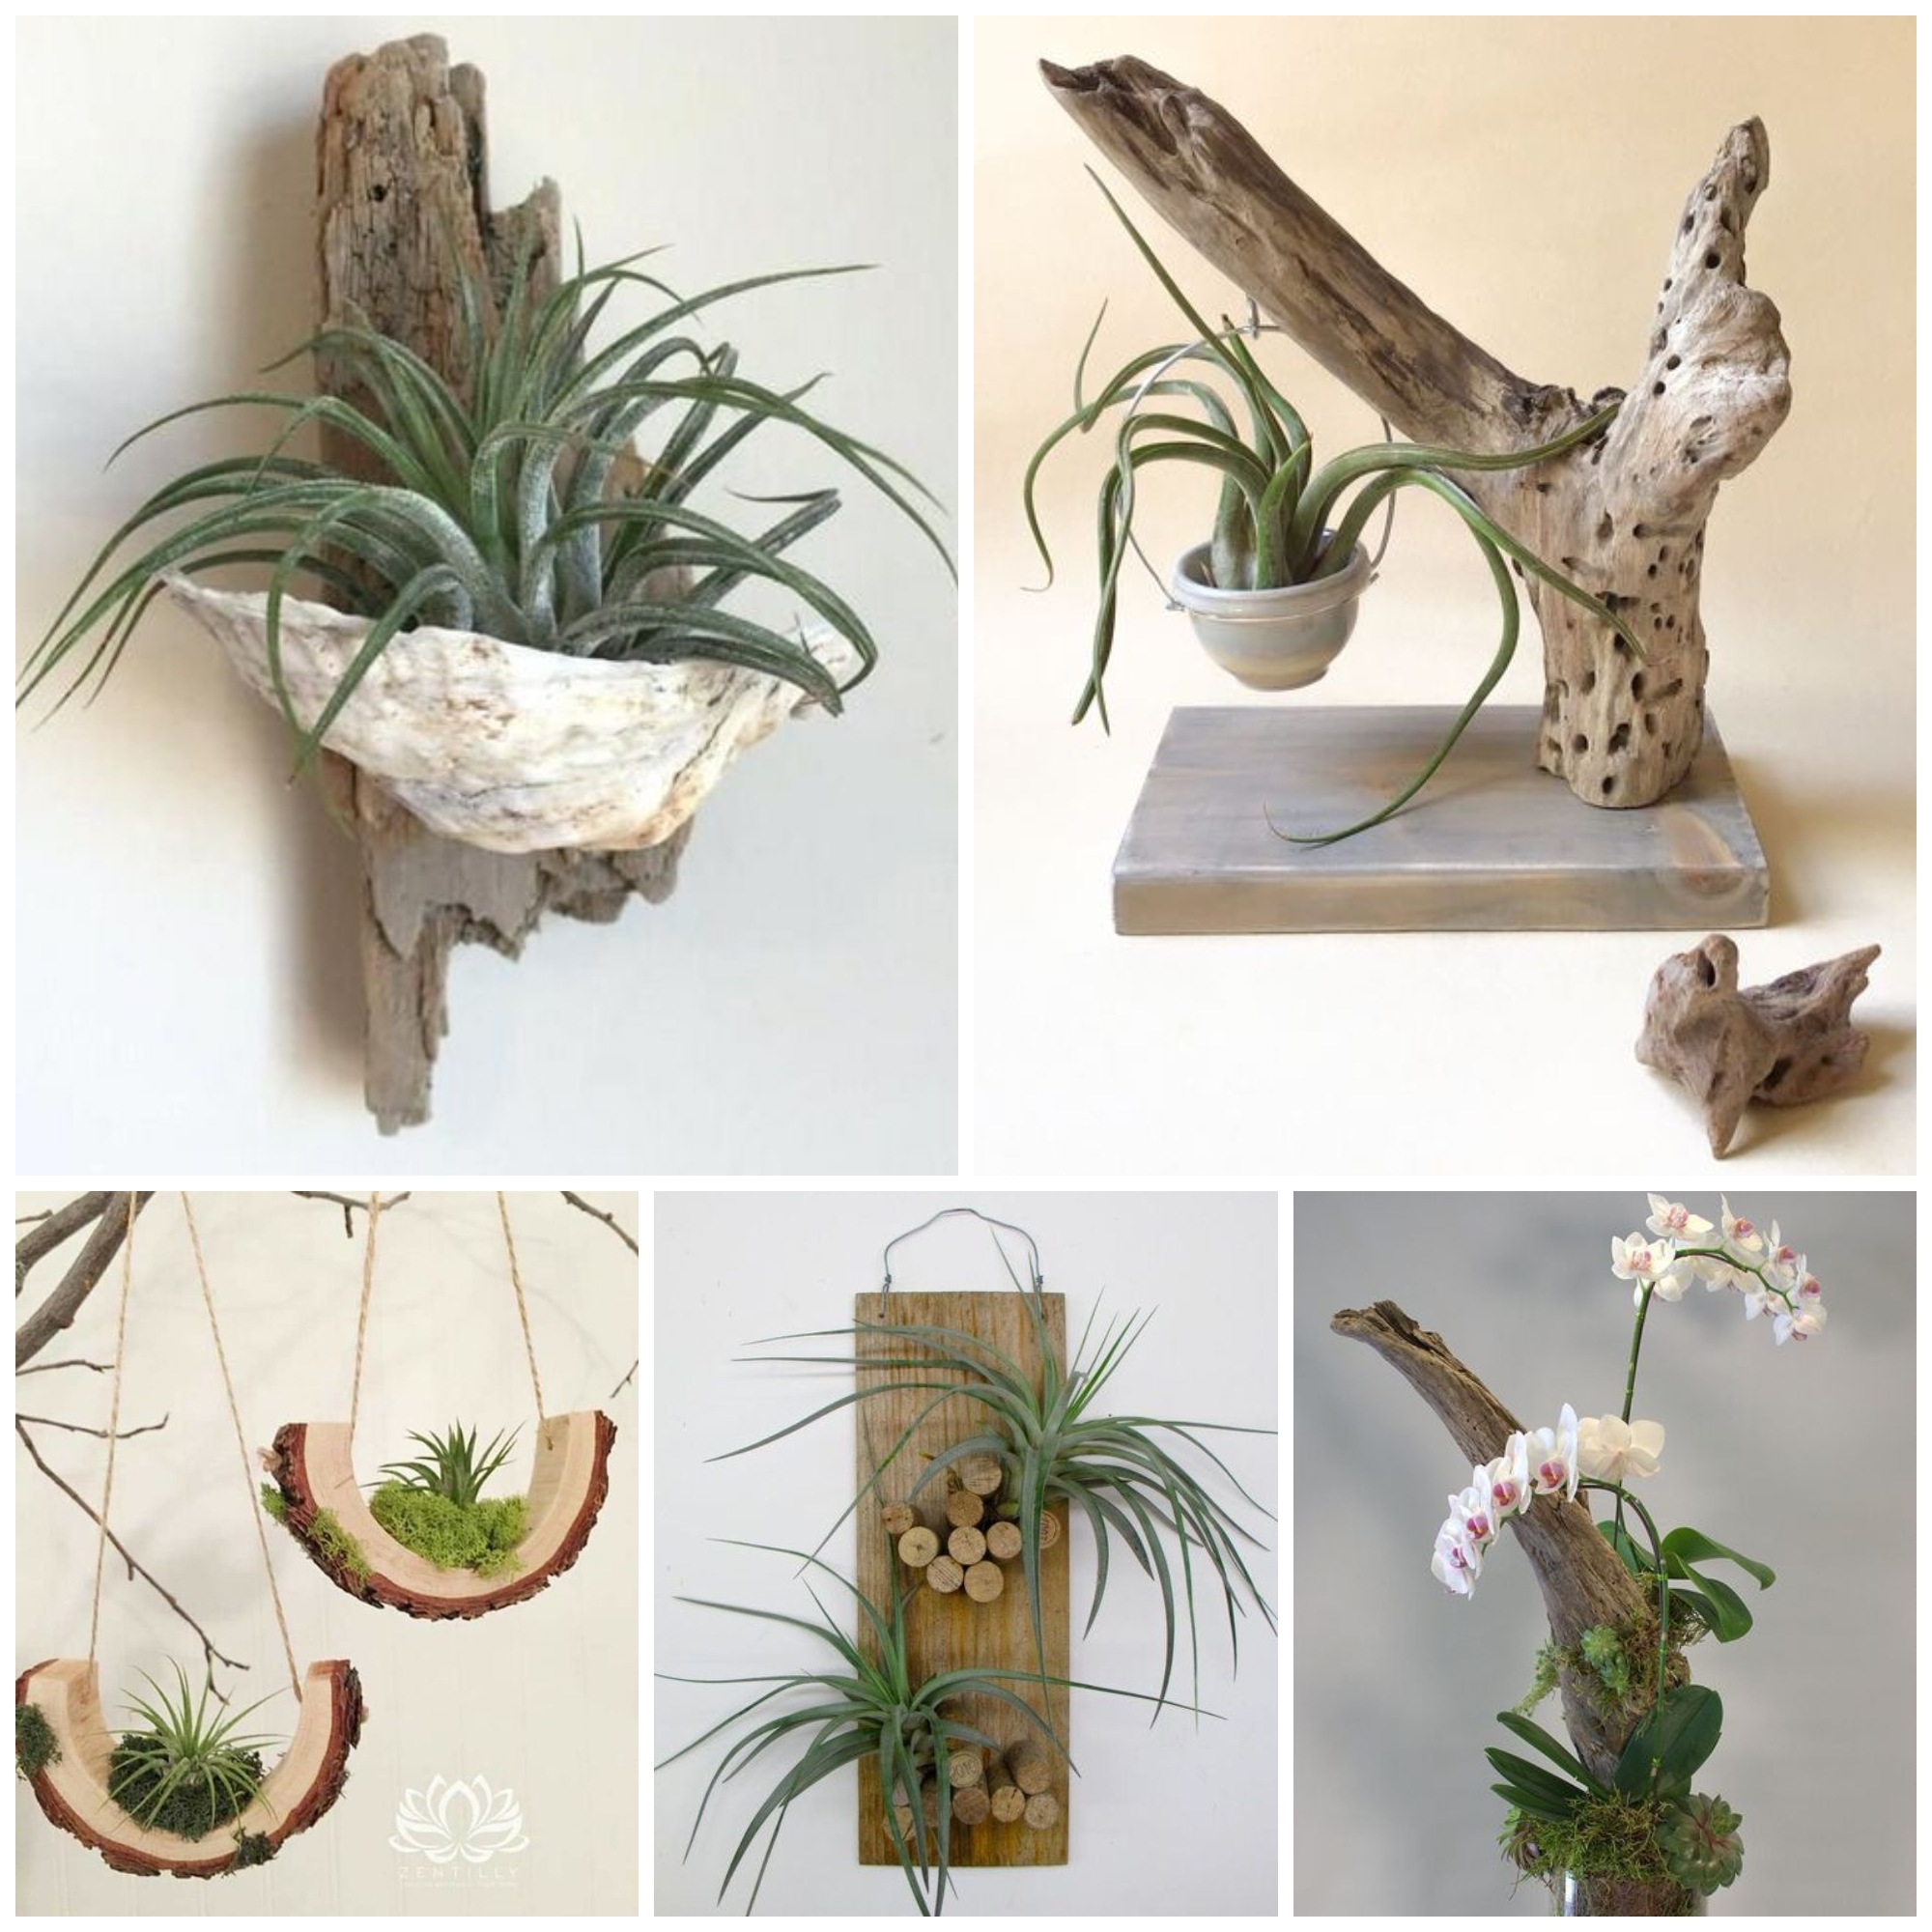 Driftwood Planter Ideas For Your Home